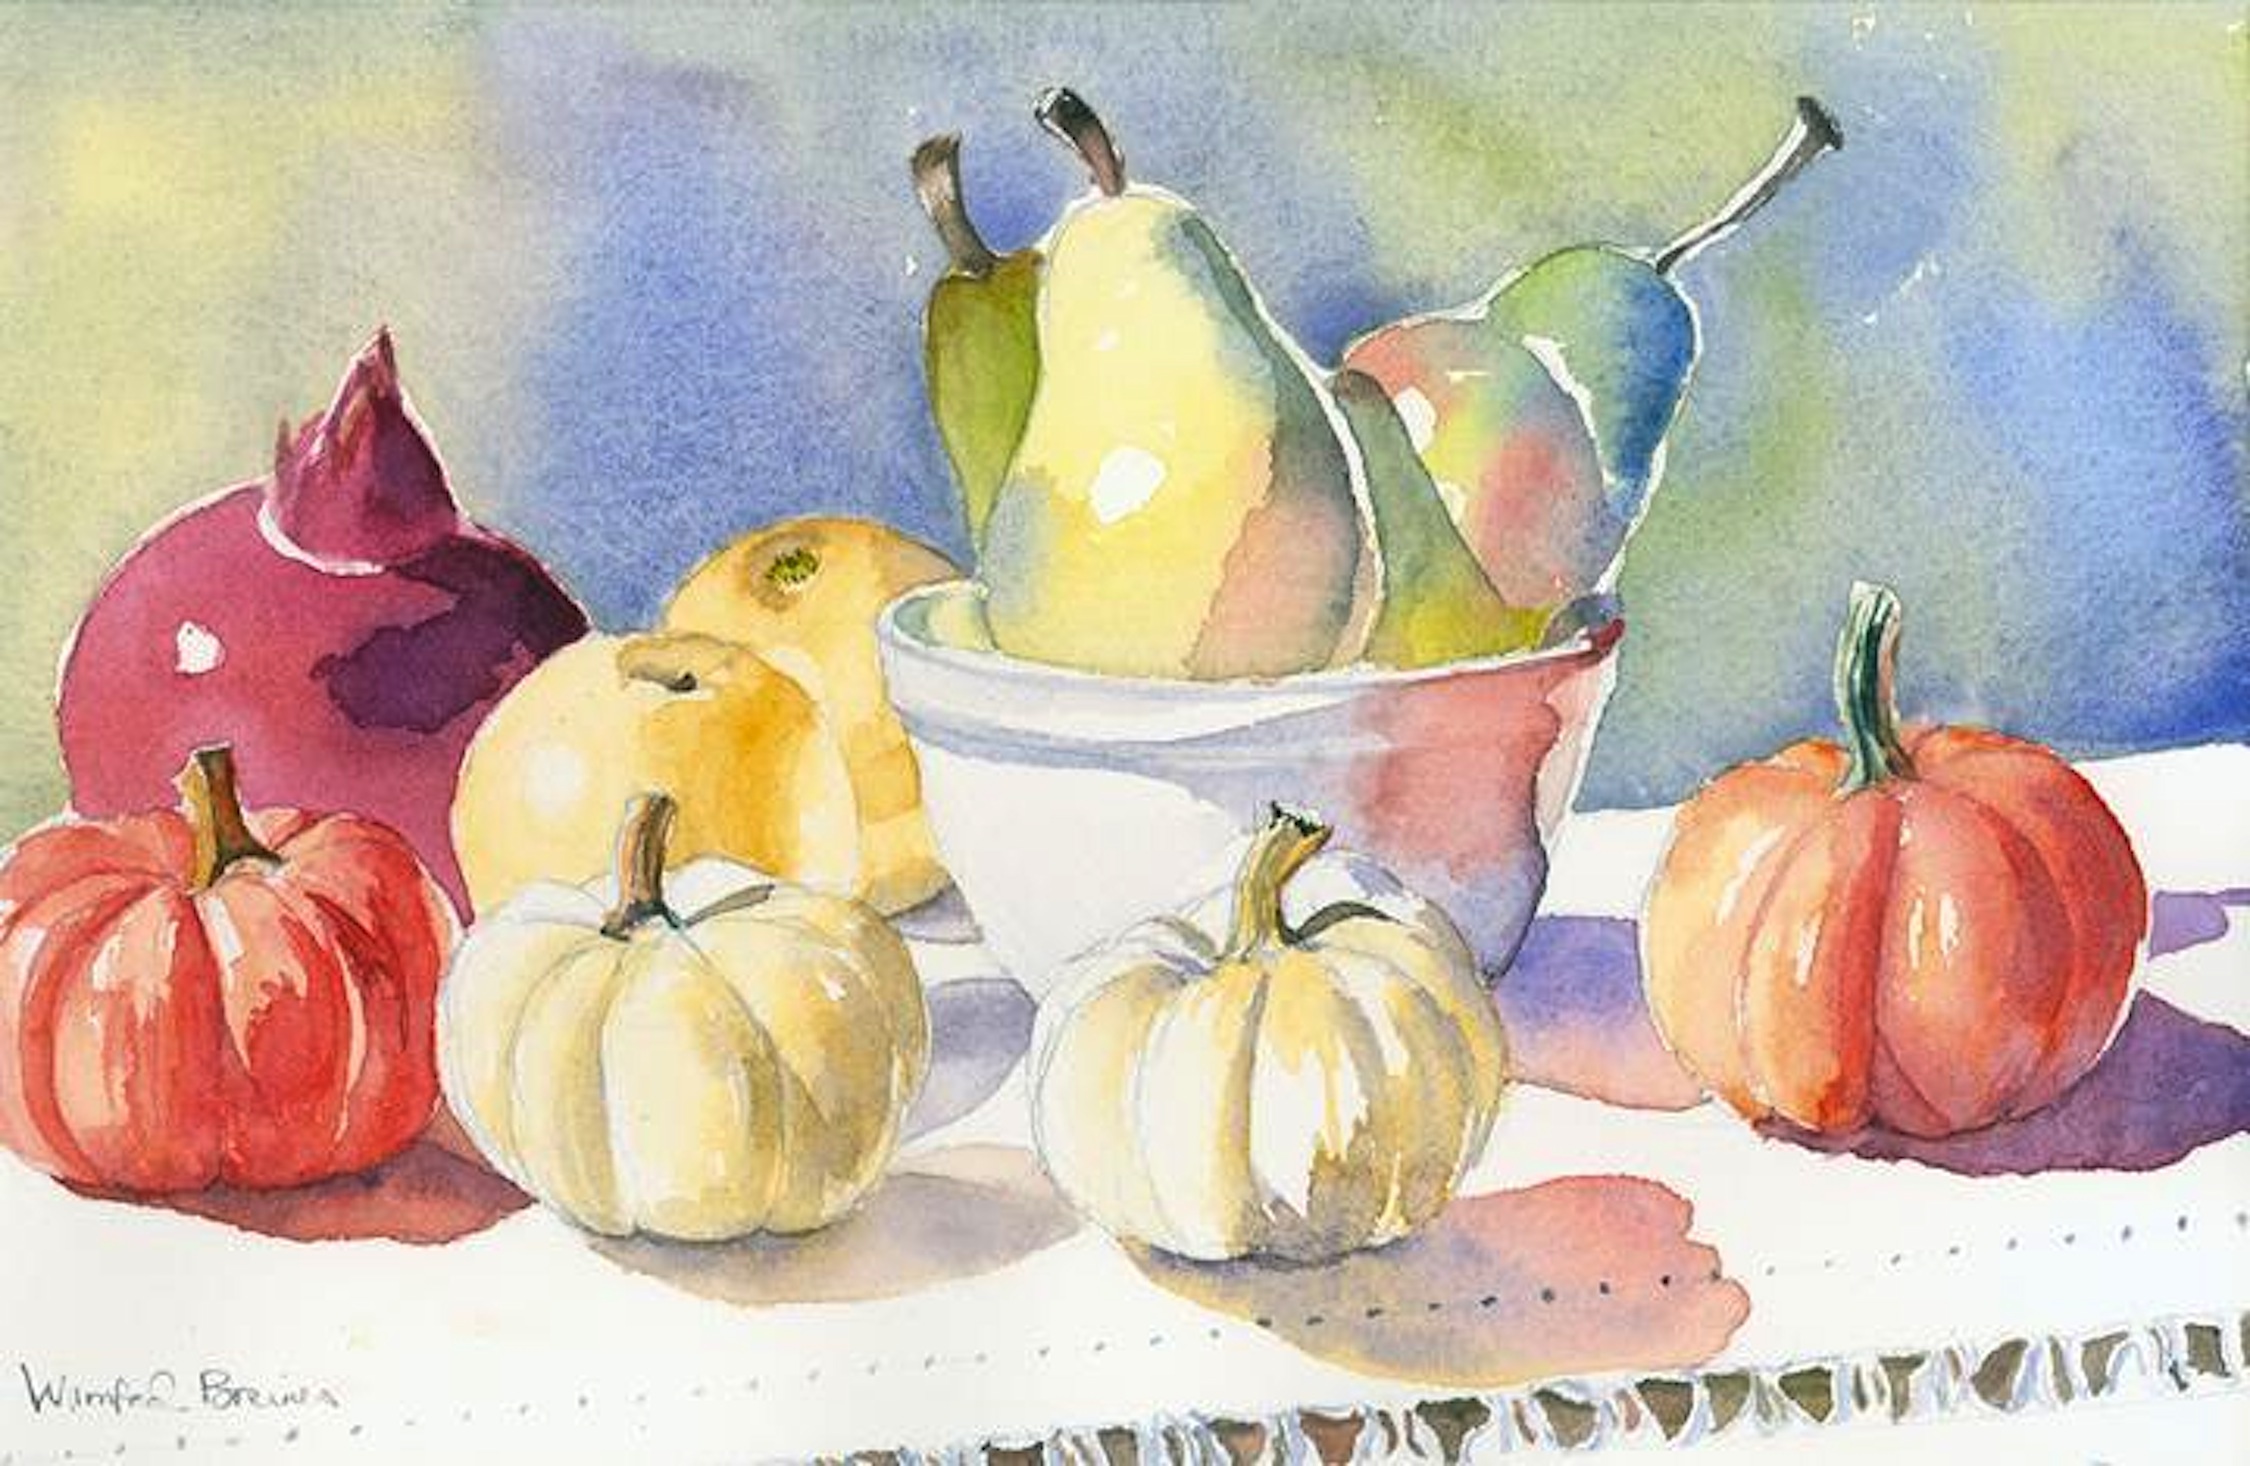  Winifred Breines,   Fall Fruits and Vegetables,   watercolor, 15.5x10 